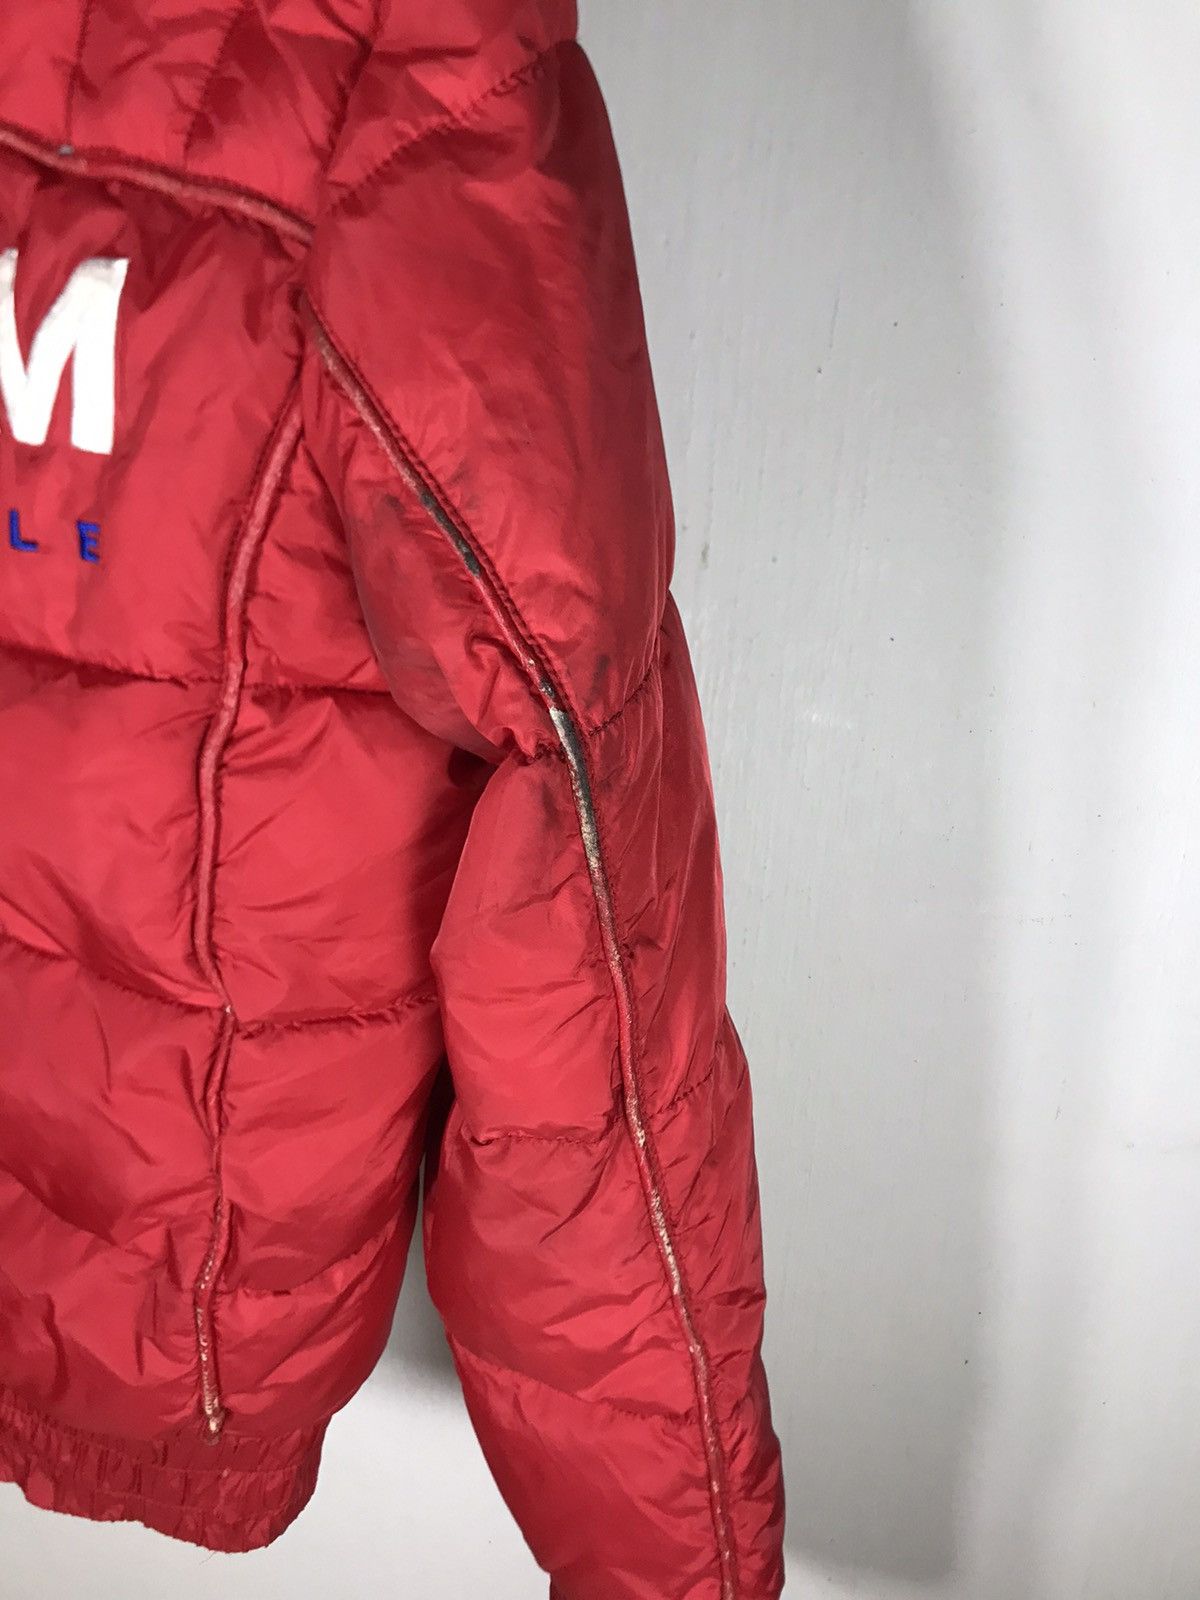 Red Jacket Polham detachable hoodie puffer jacket spell out embroidered Size US M / EU 48-50 / 2 - 13 Thumbnail